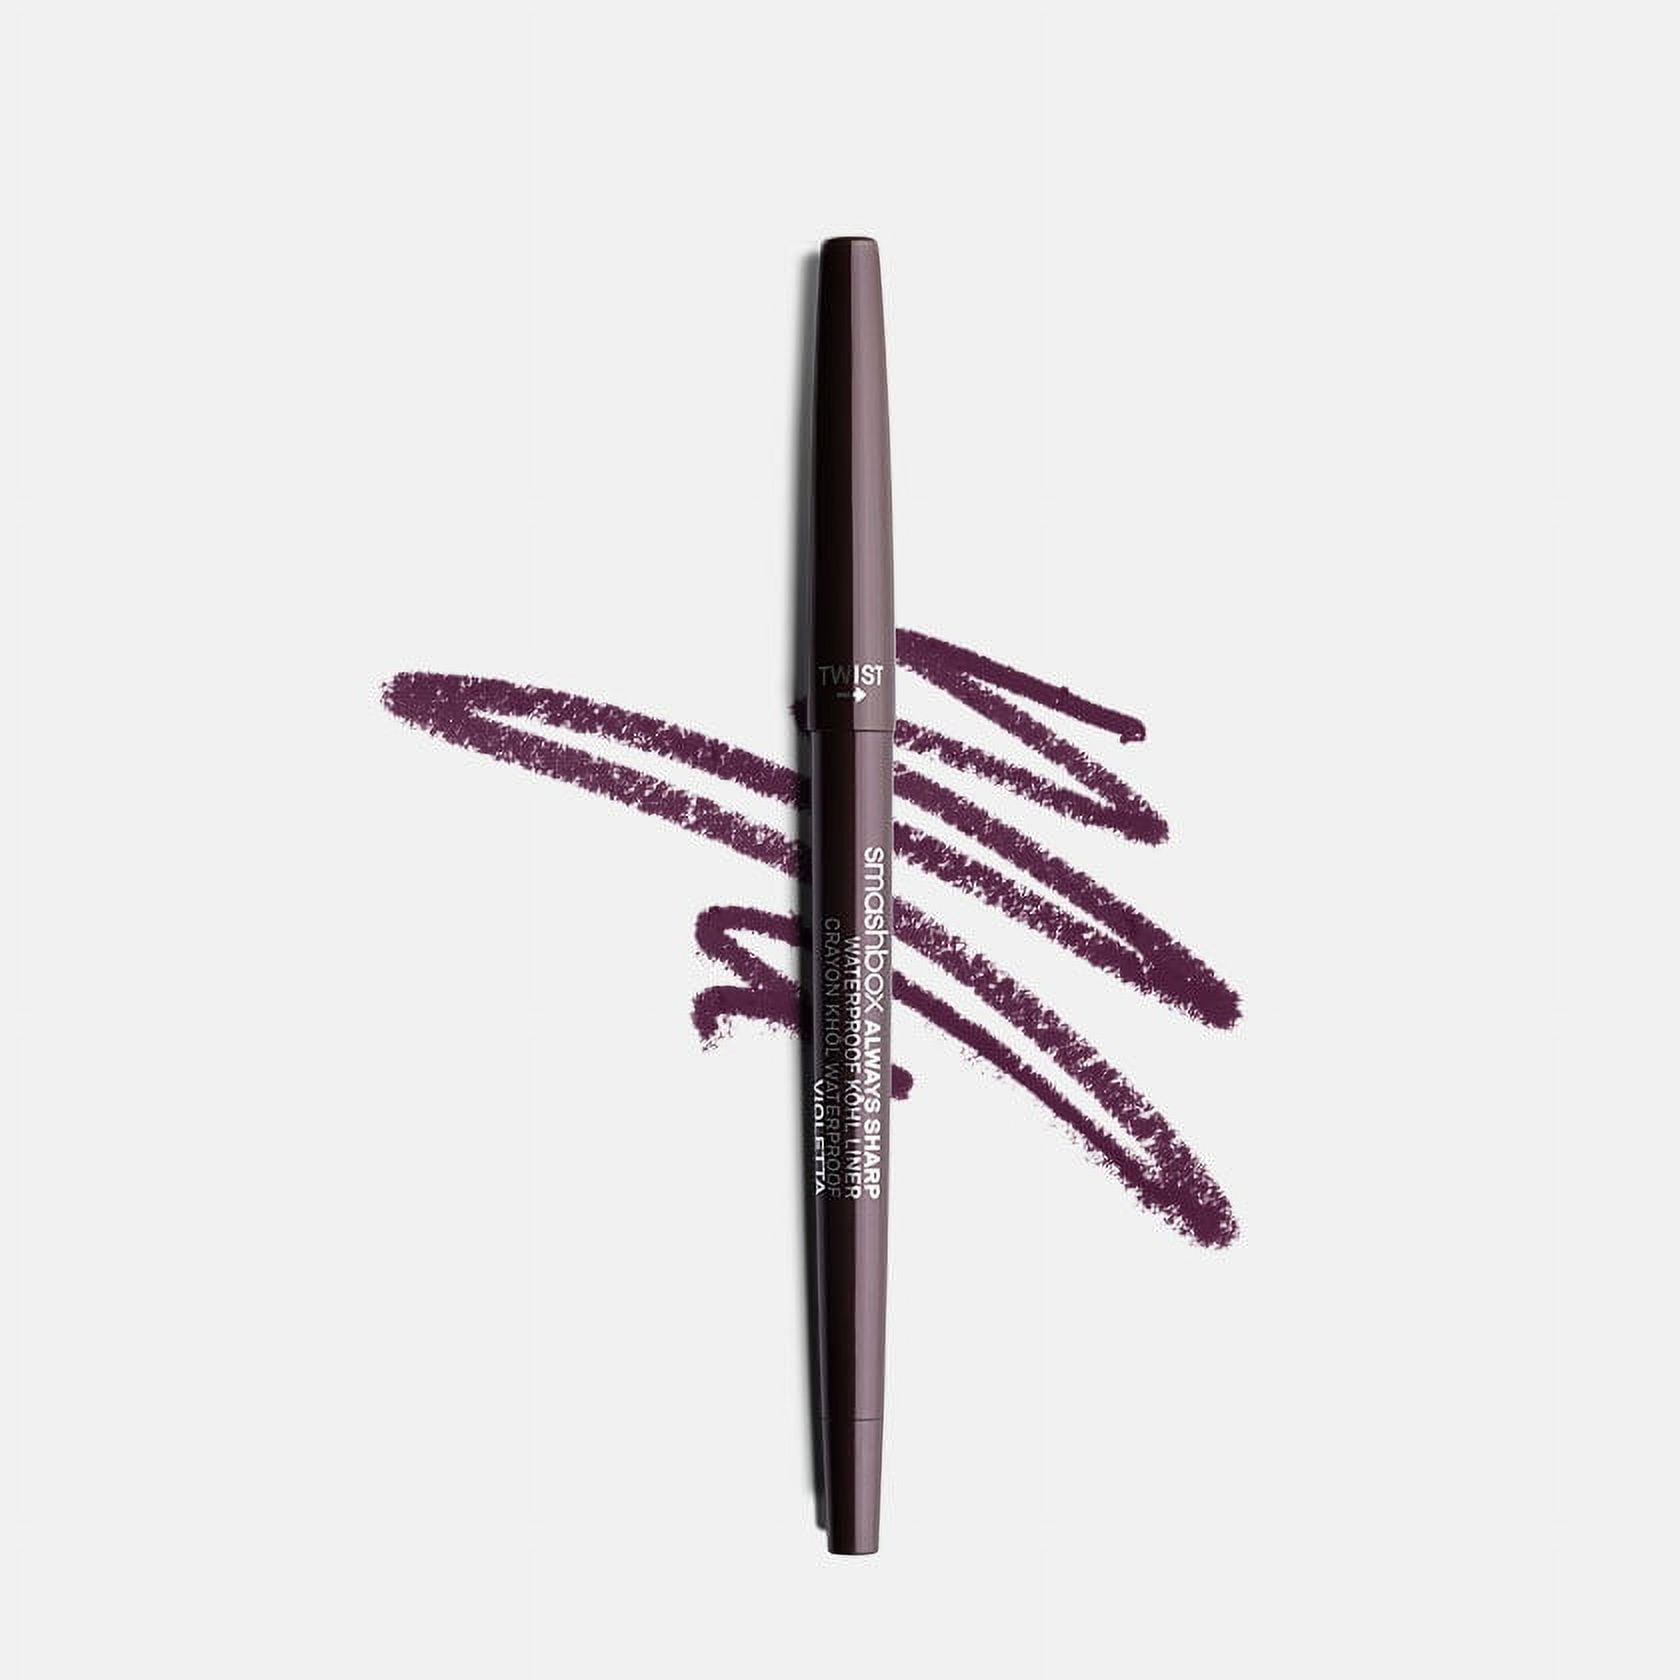 Woochie Purple Water Activated Makeup (0.07 oz/1.98 gm)